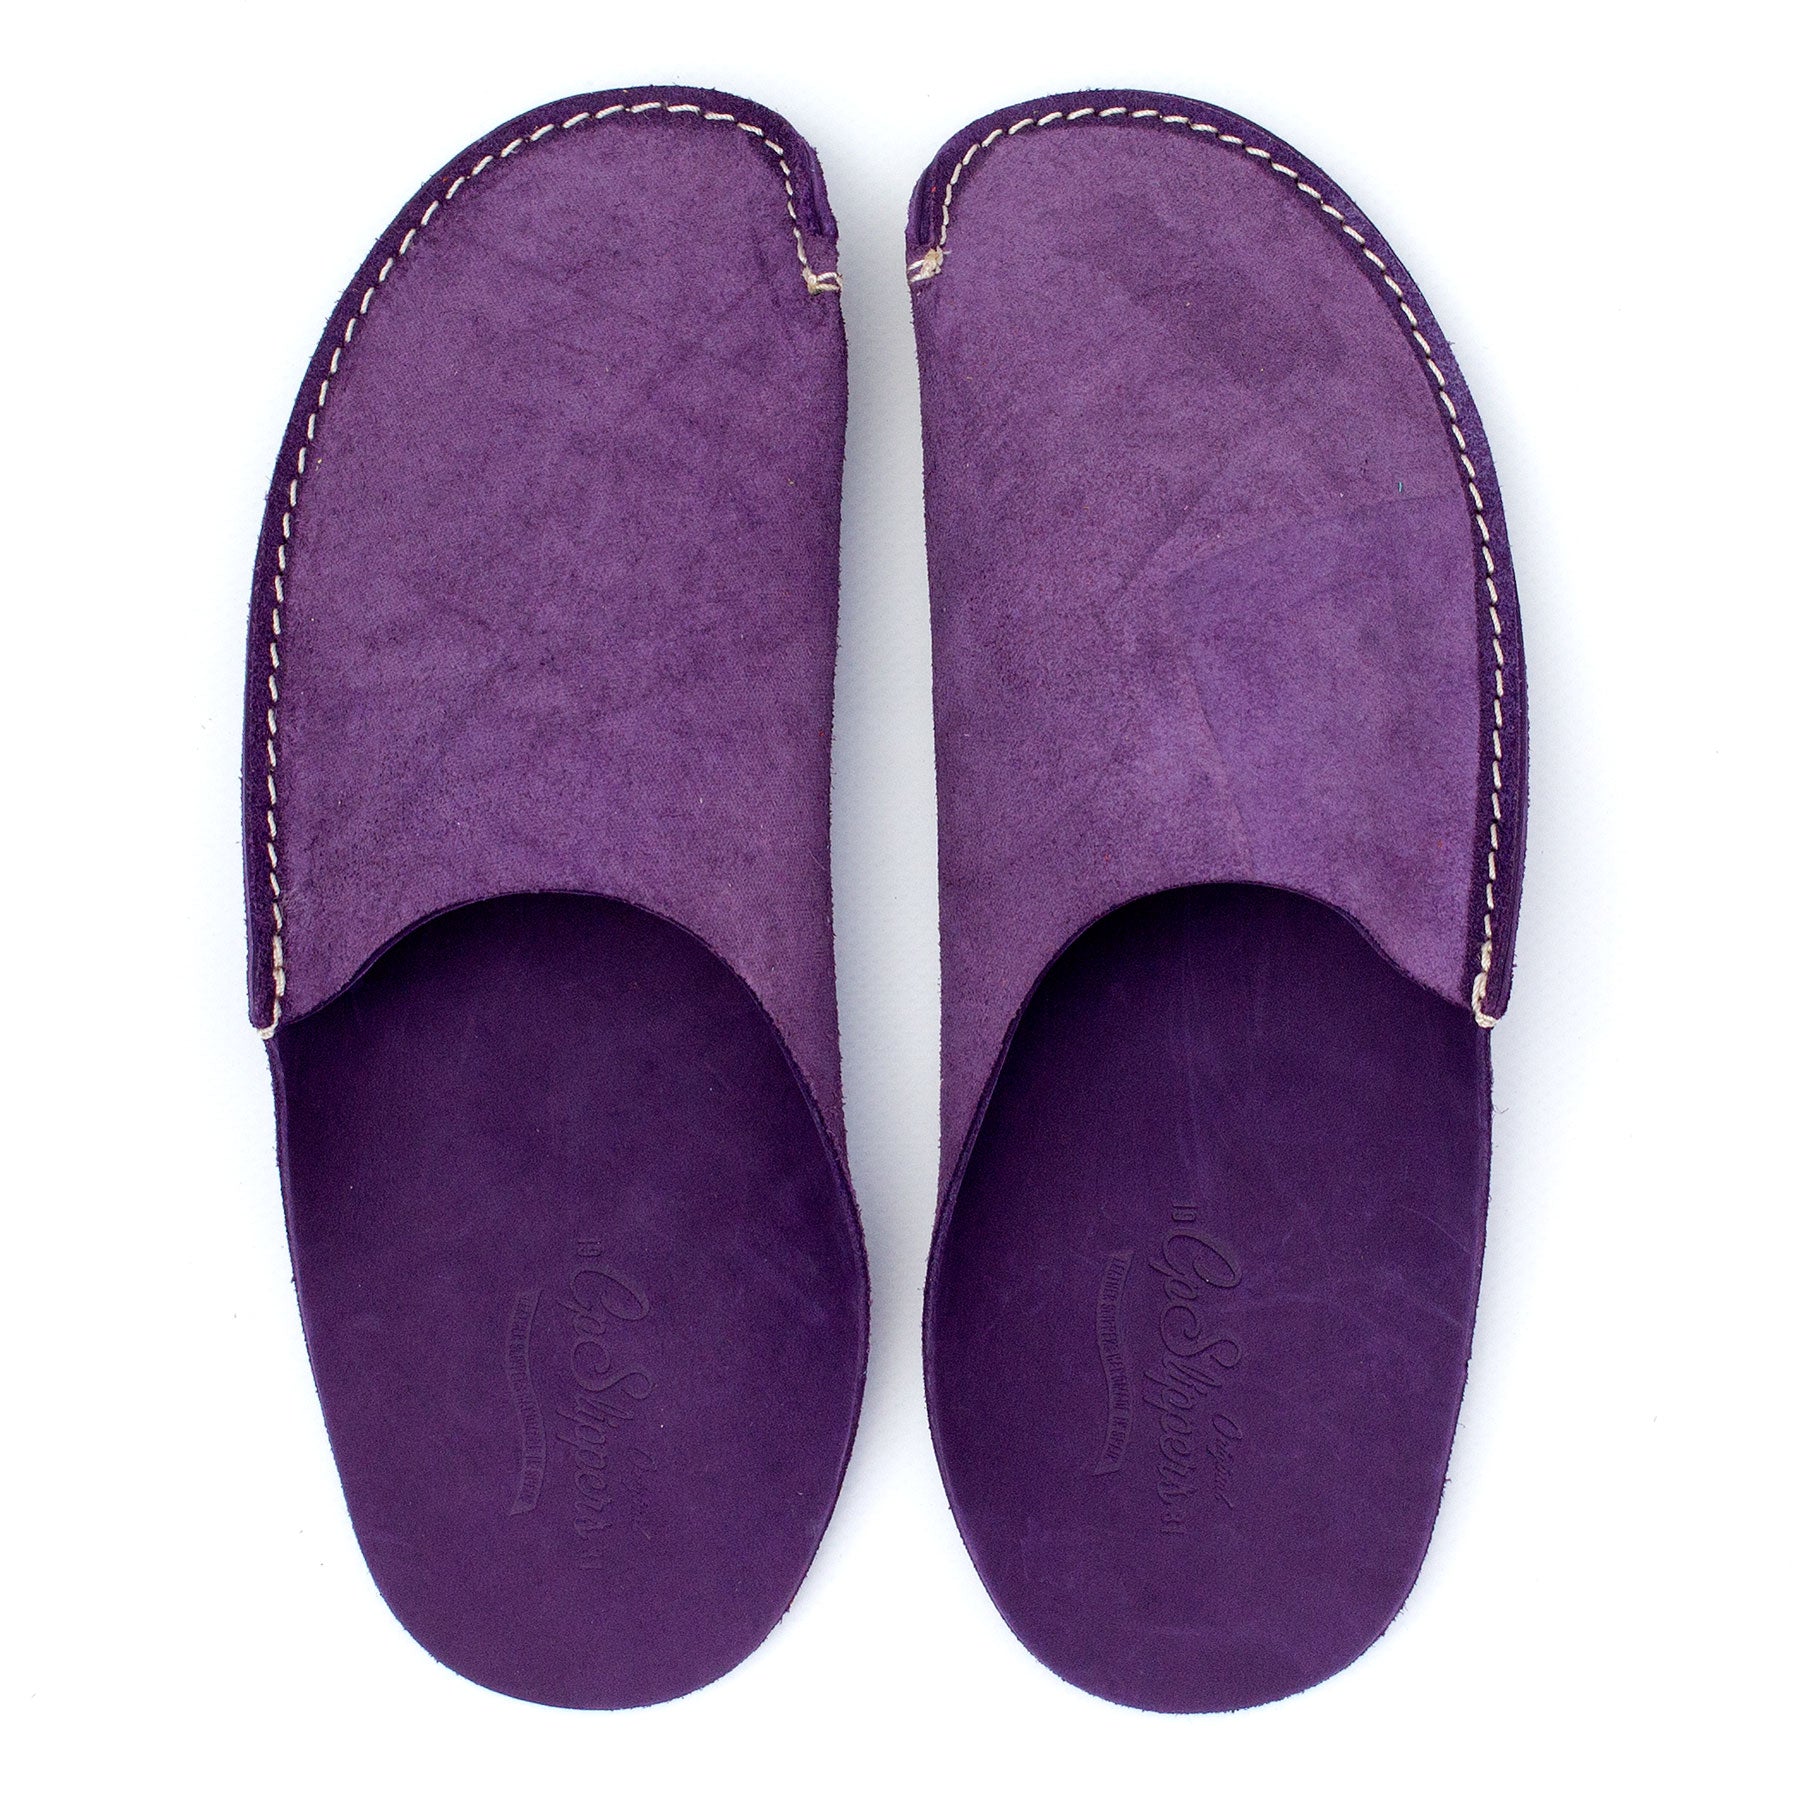 Violet CP Slippers Minimalist home shoes for man and woman